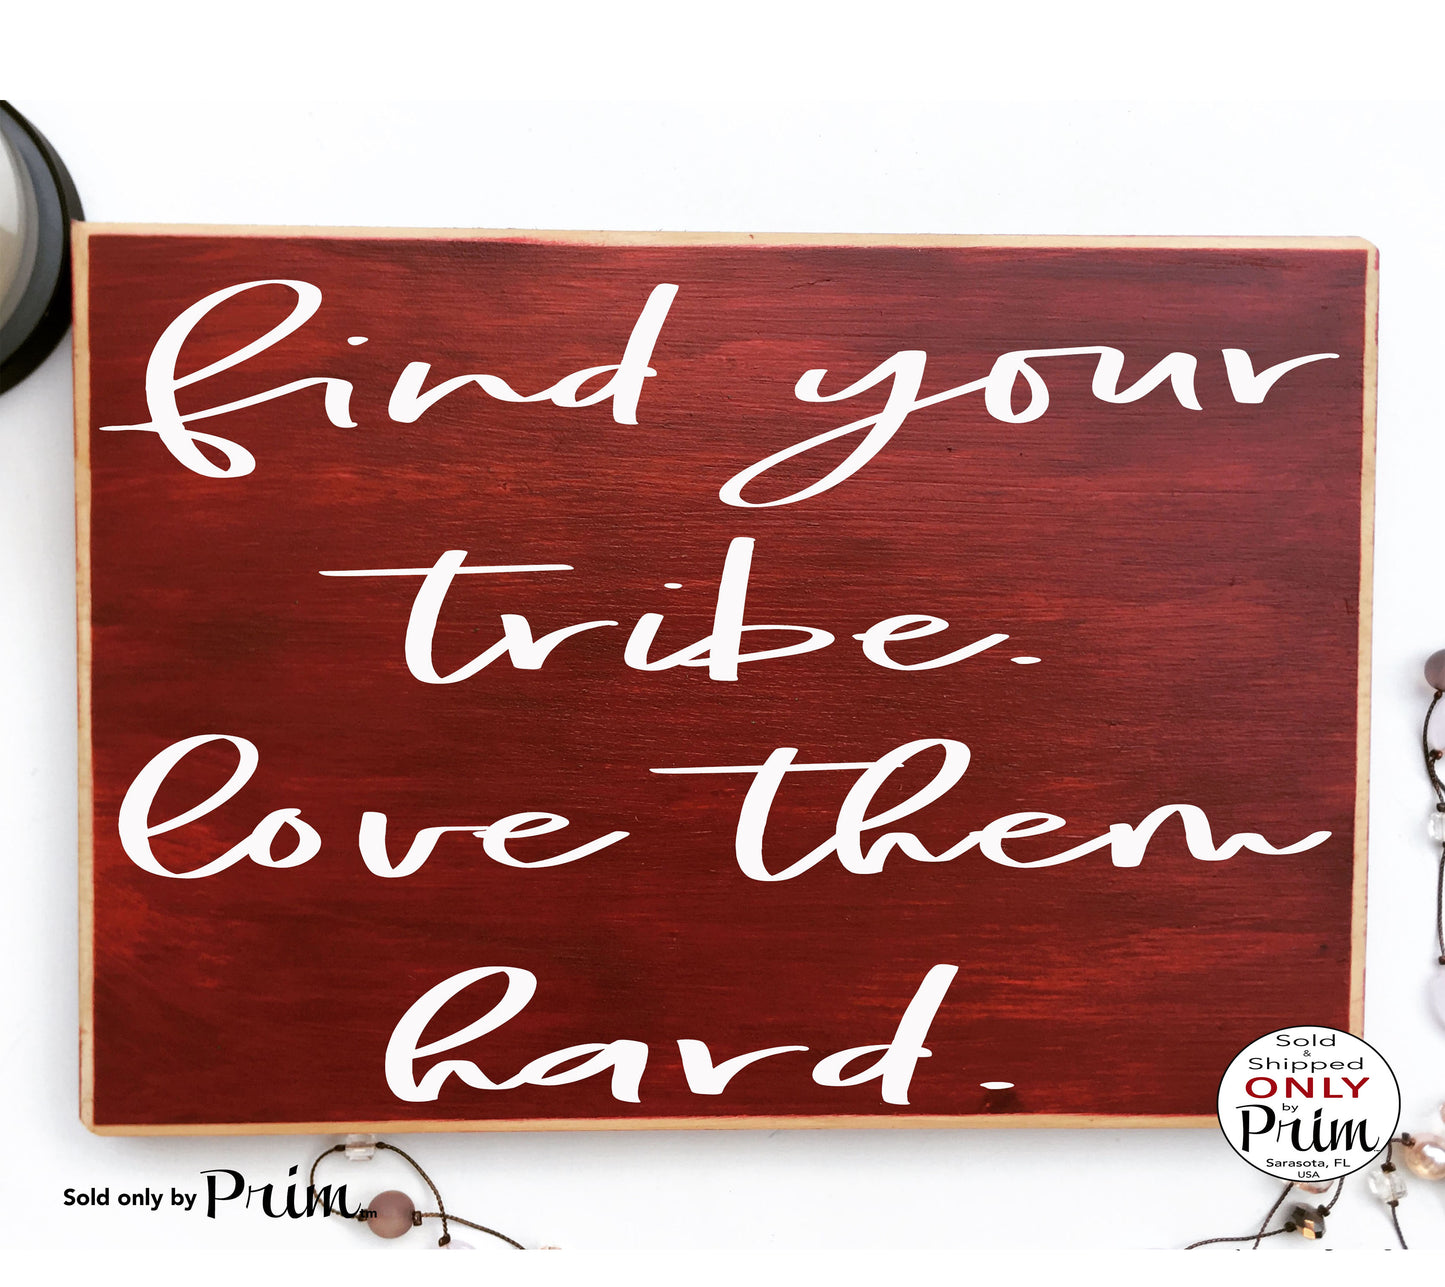 Find Your Tribe Love Them Hard Custom Wood Sign Family Friends Home Sweet Home Motivational Inspirational Good Vibes Only Plaque